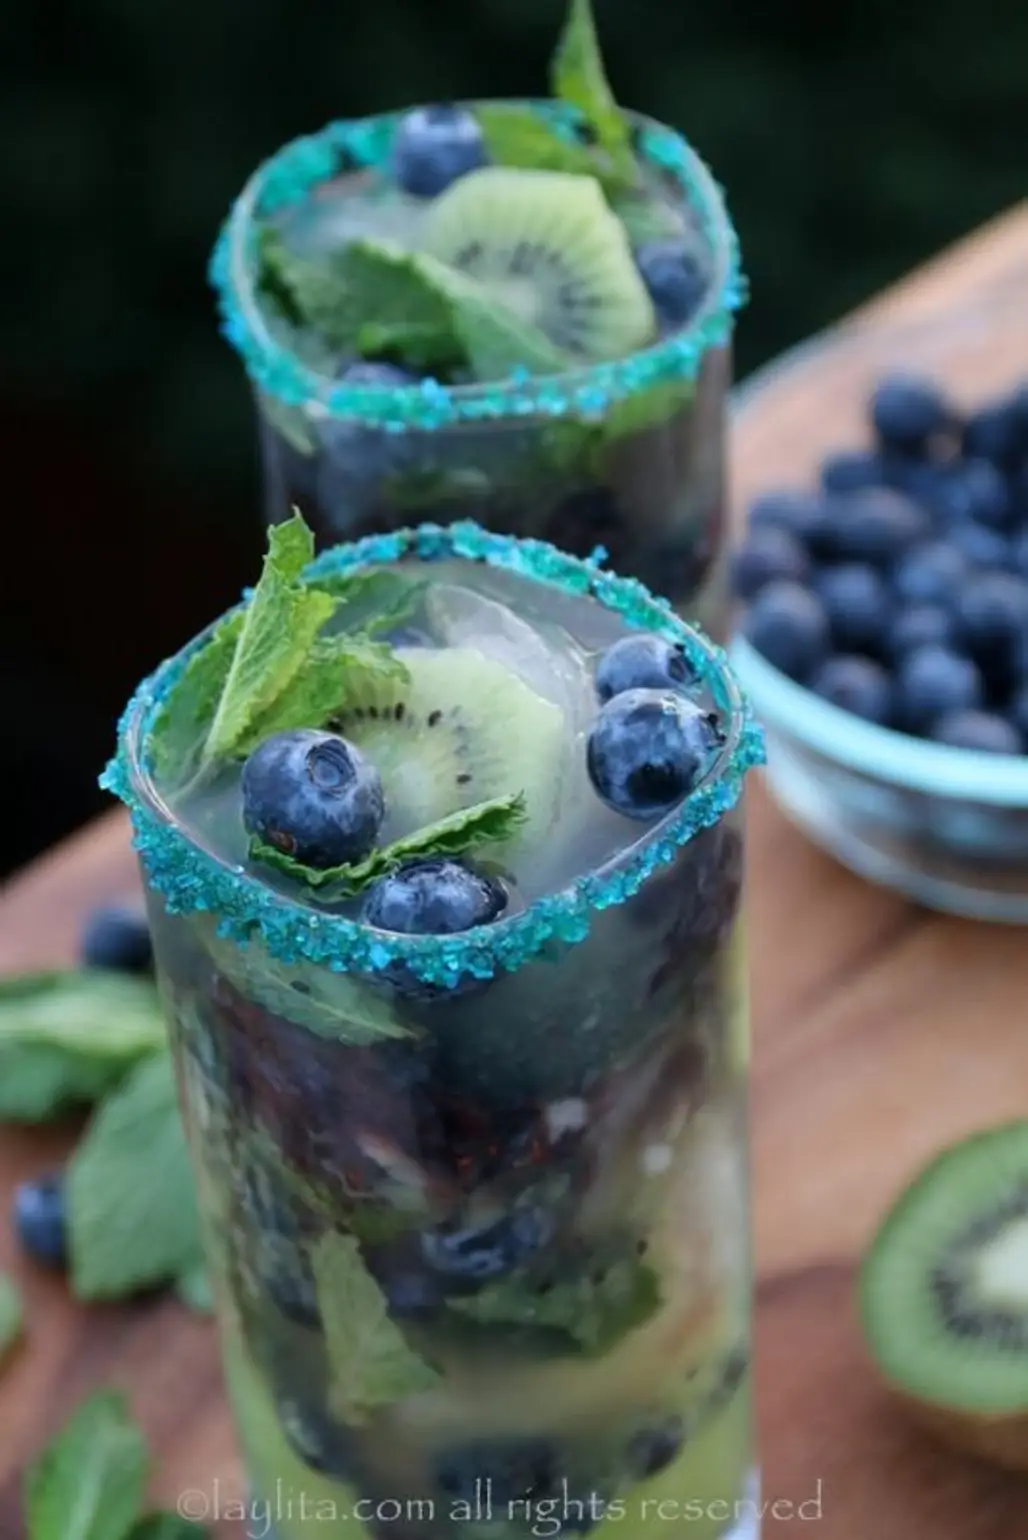 Garnish the Glass Rims with Green or Blue Sugar